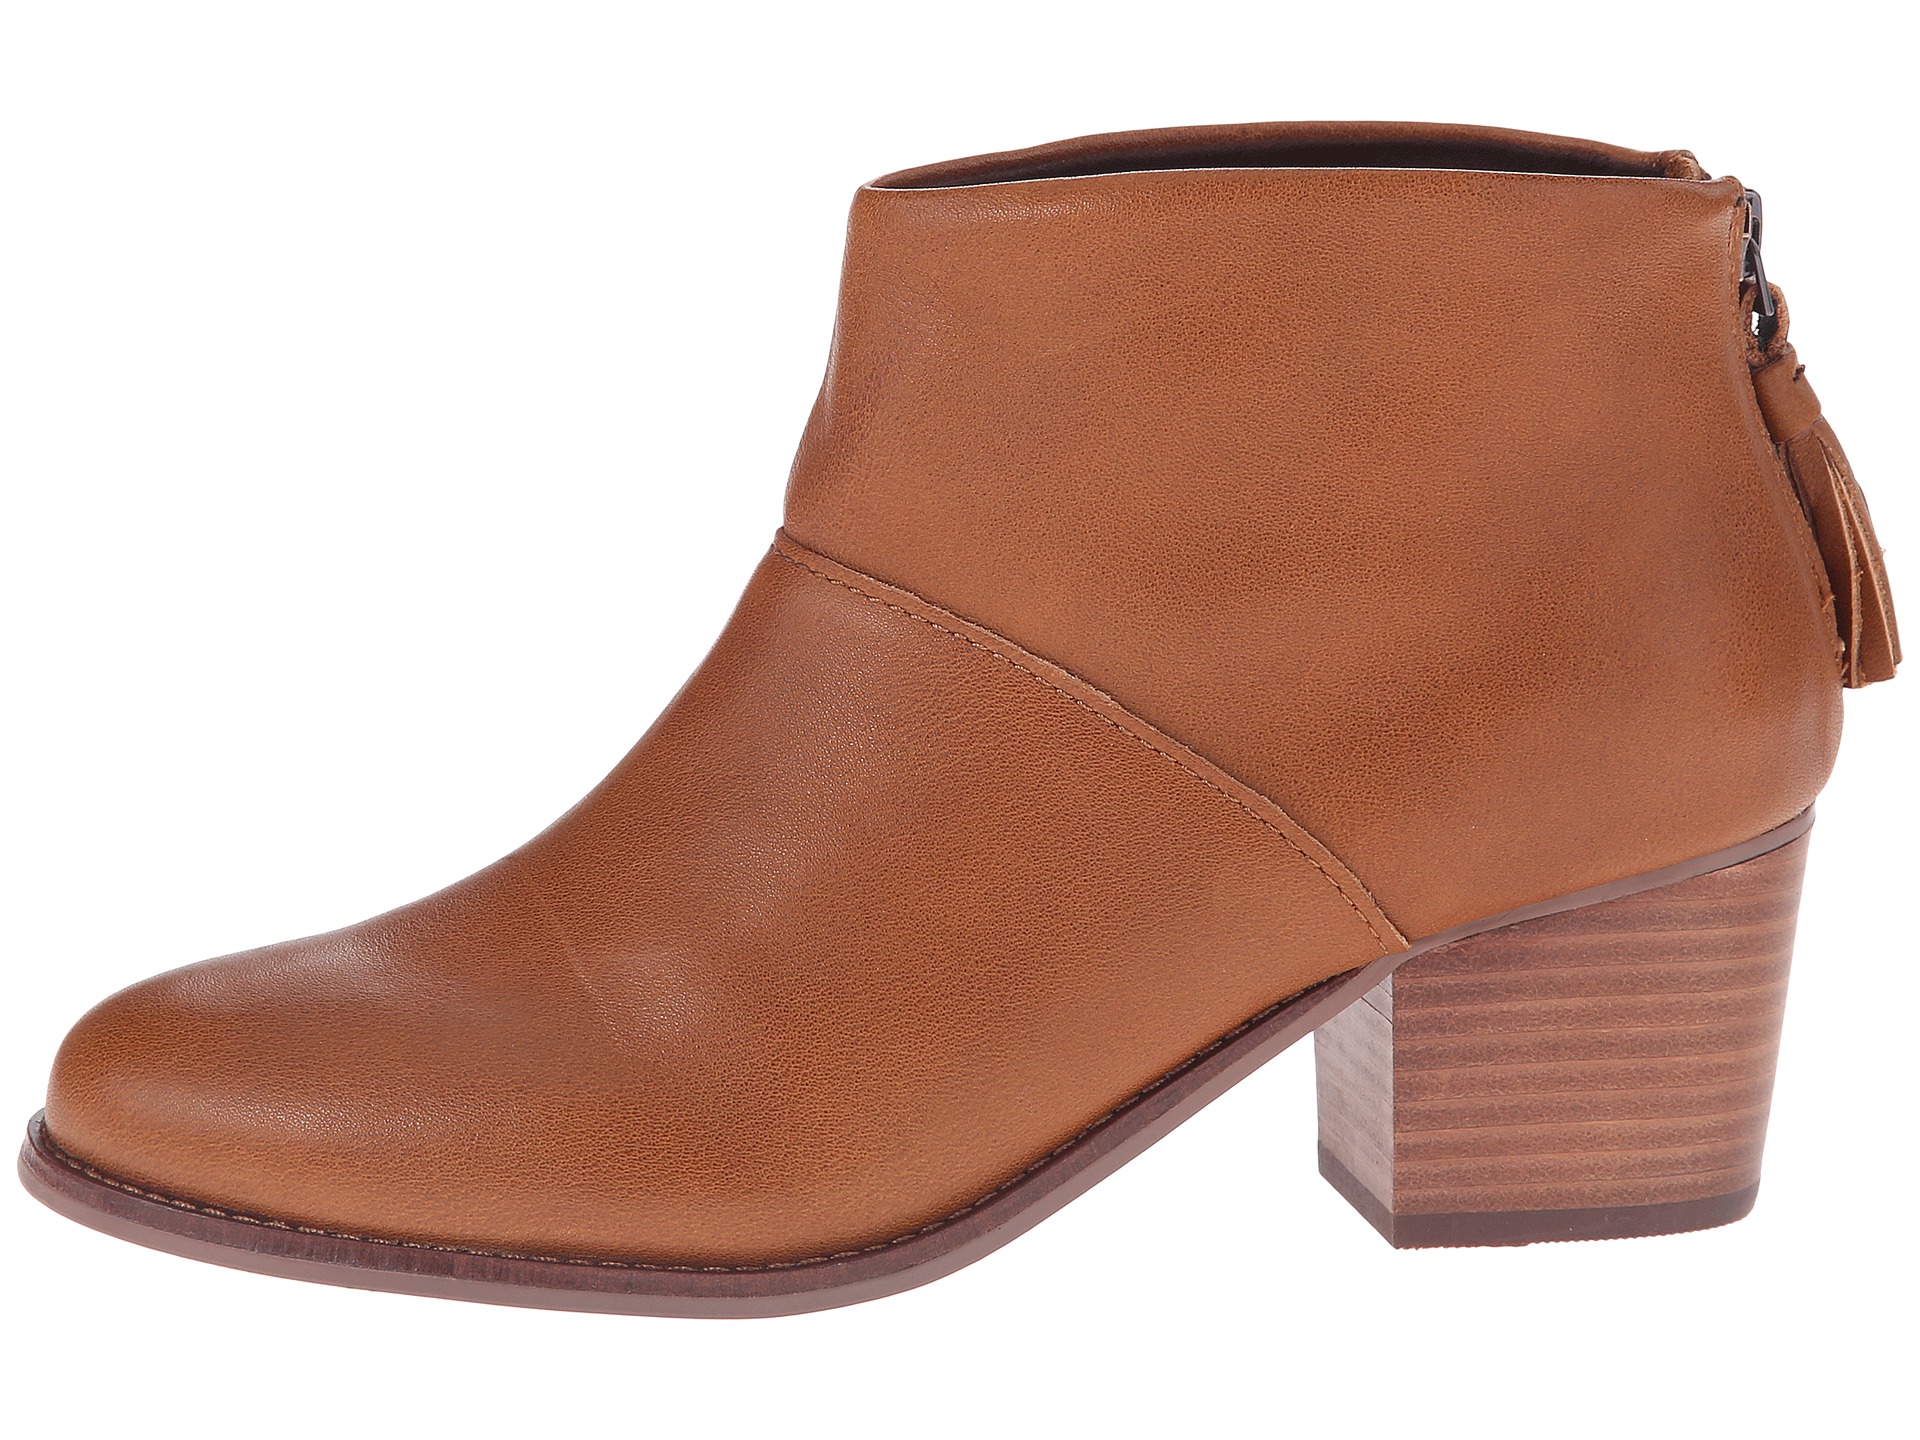 TOMS Leila Booties at Zappos.com